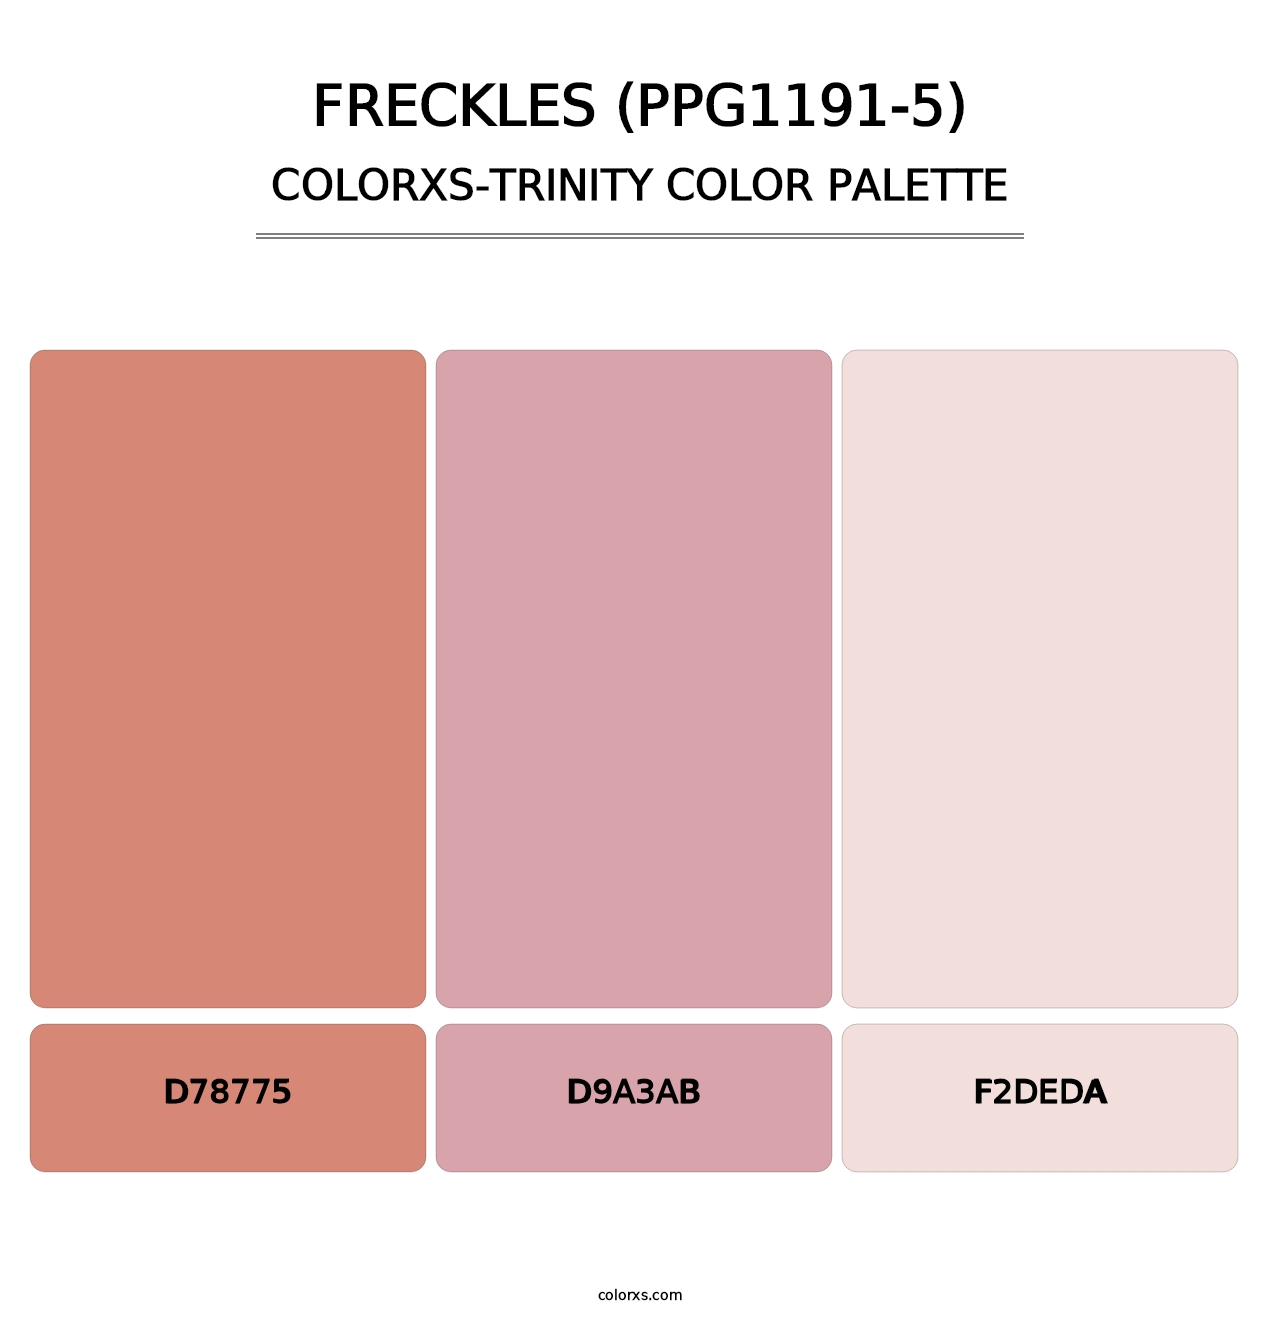 Freckles (PPG1191-5) - Colorxs Trinity Palette